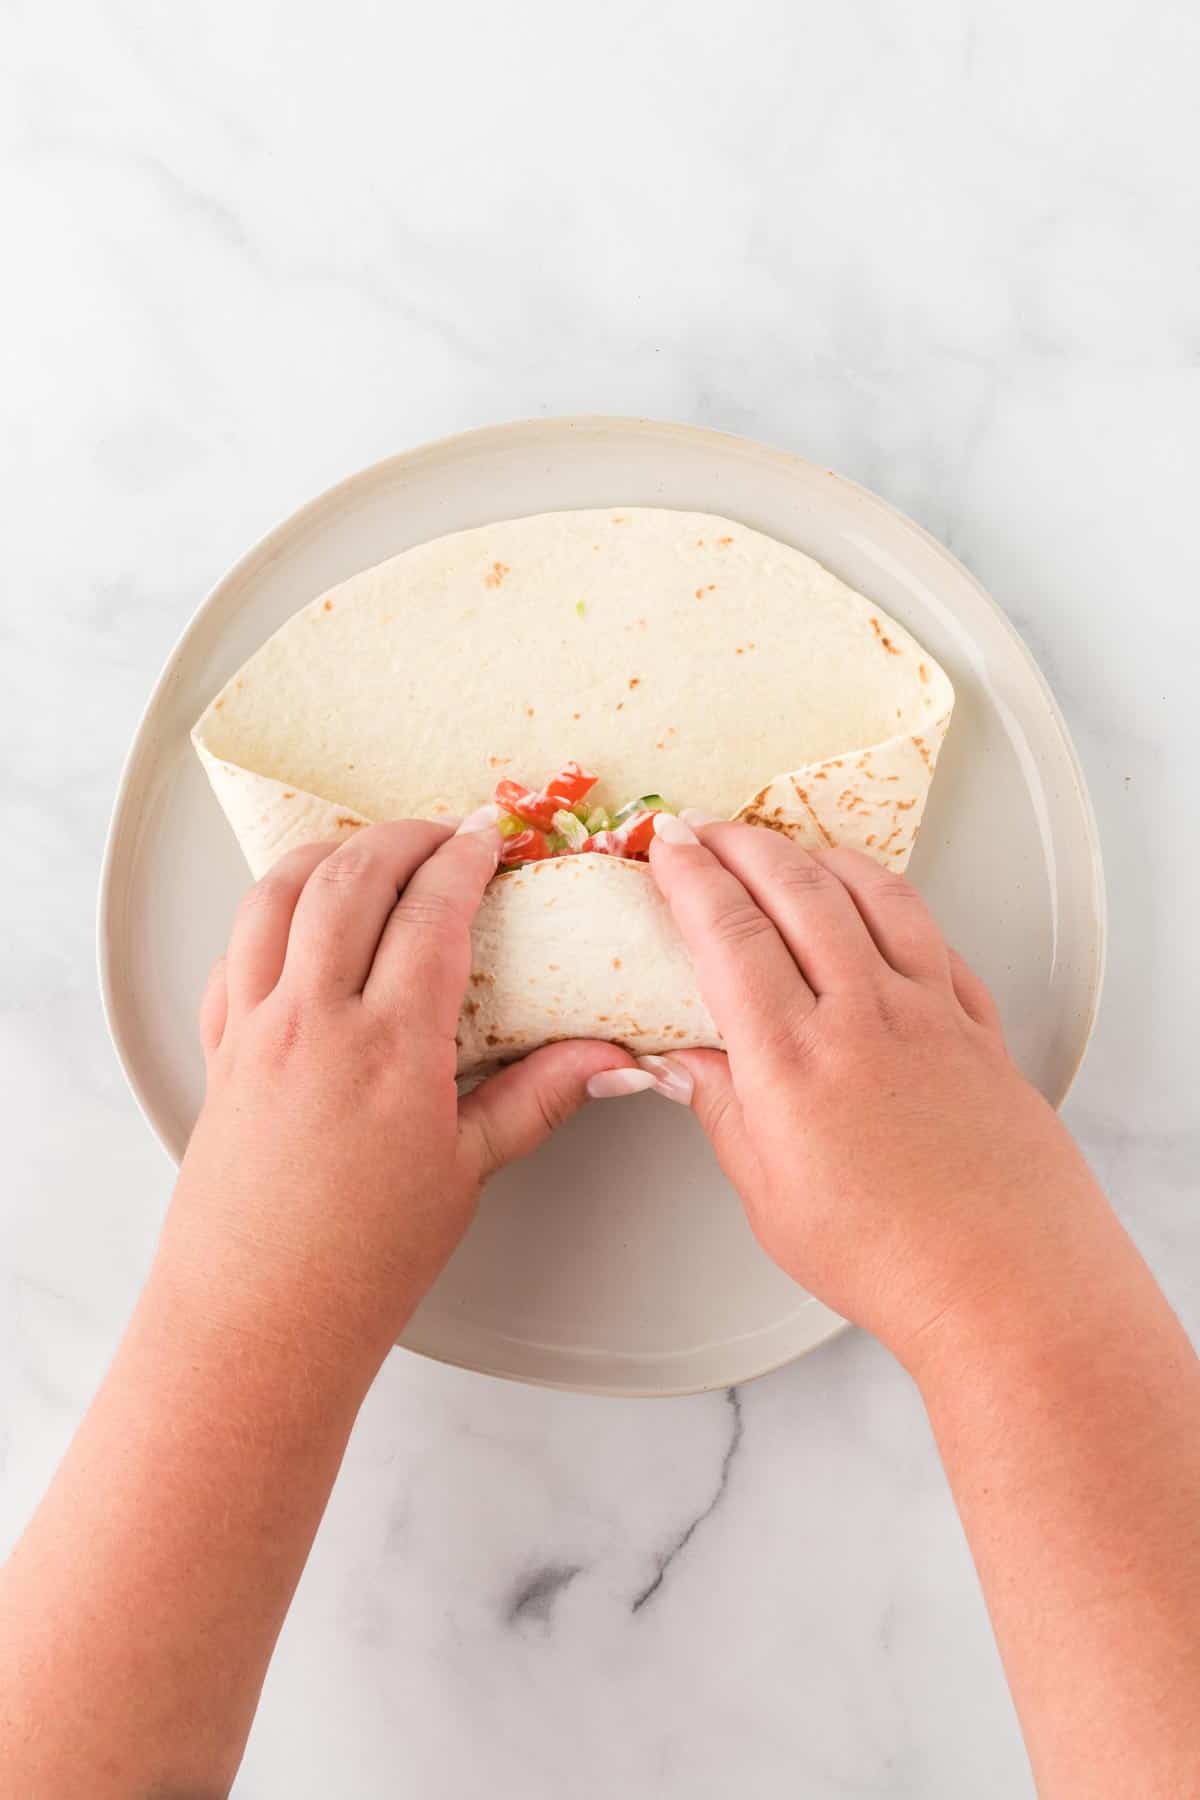 A photo of hands rolling a chickpea wrap.